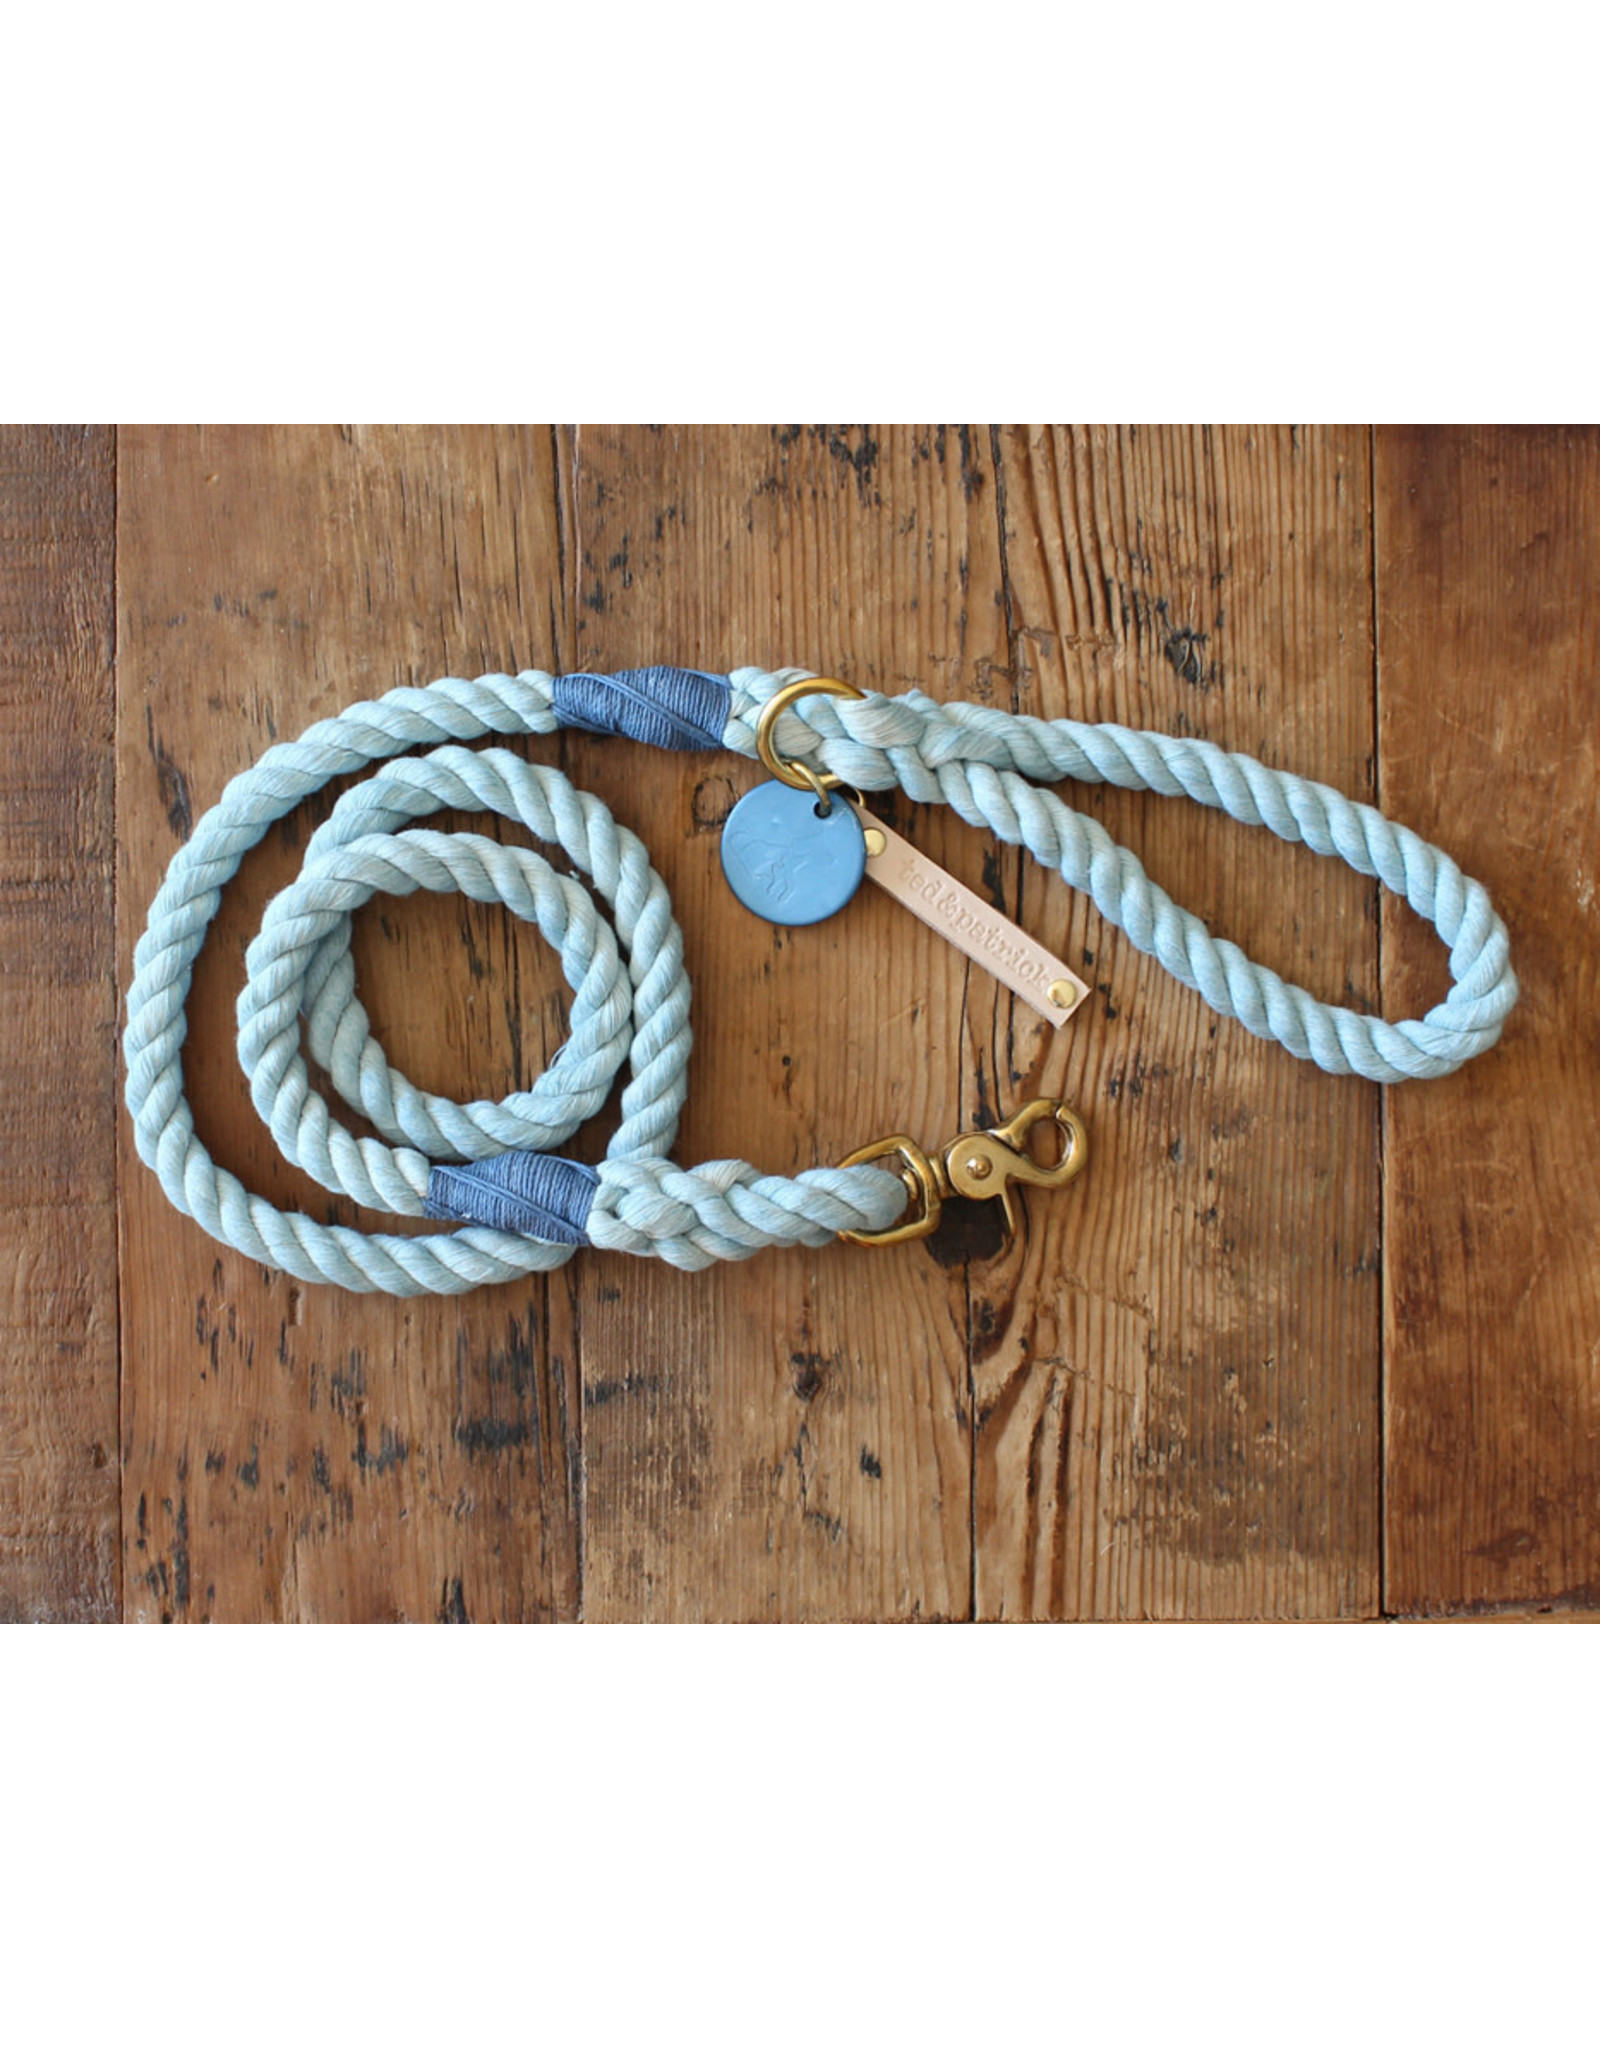 Ted & Patrick Beach Days Dog Lead with Brass Fittings